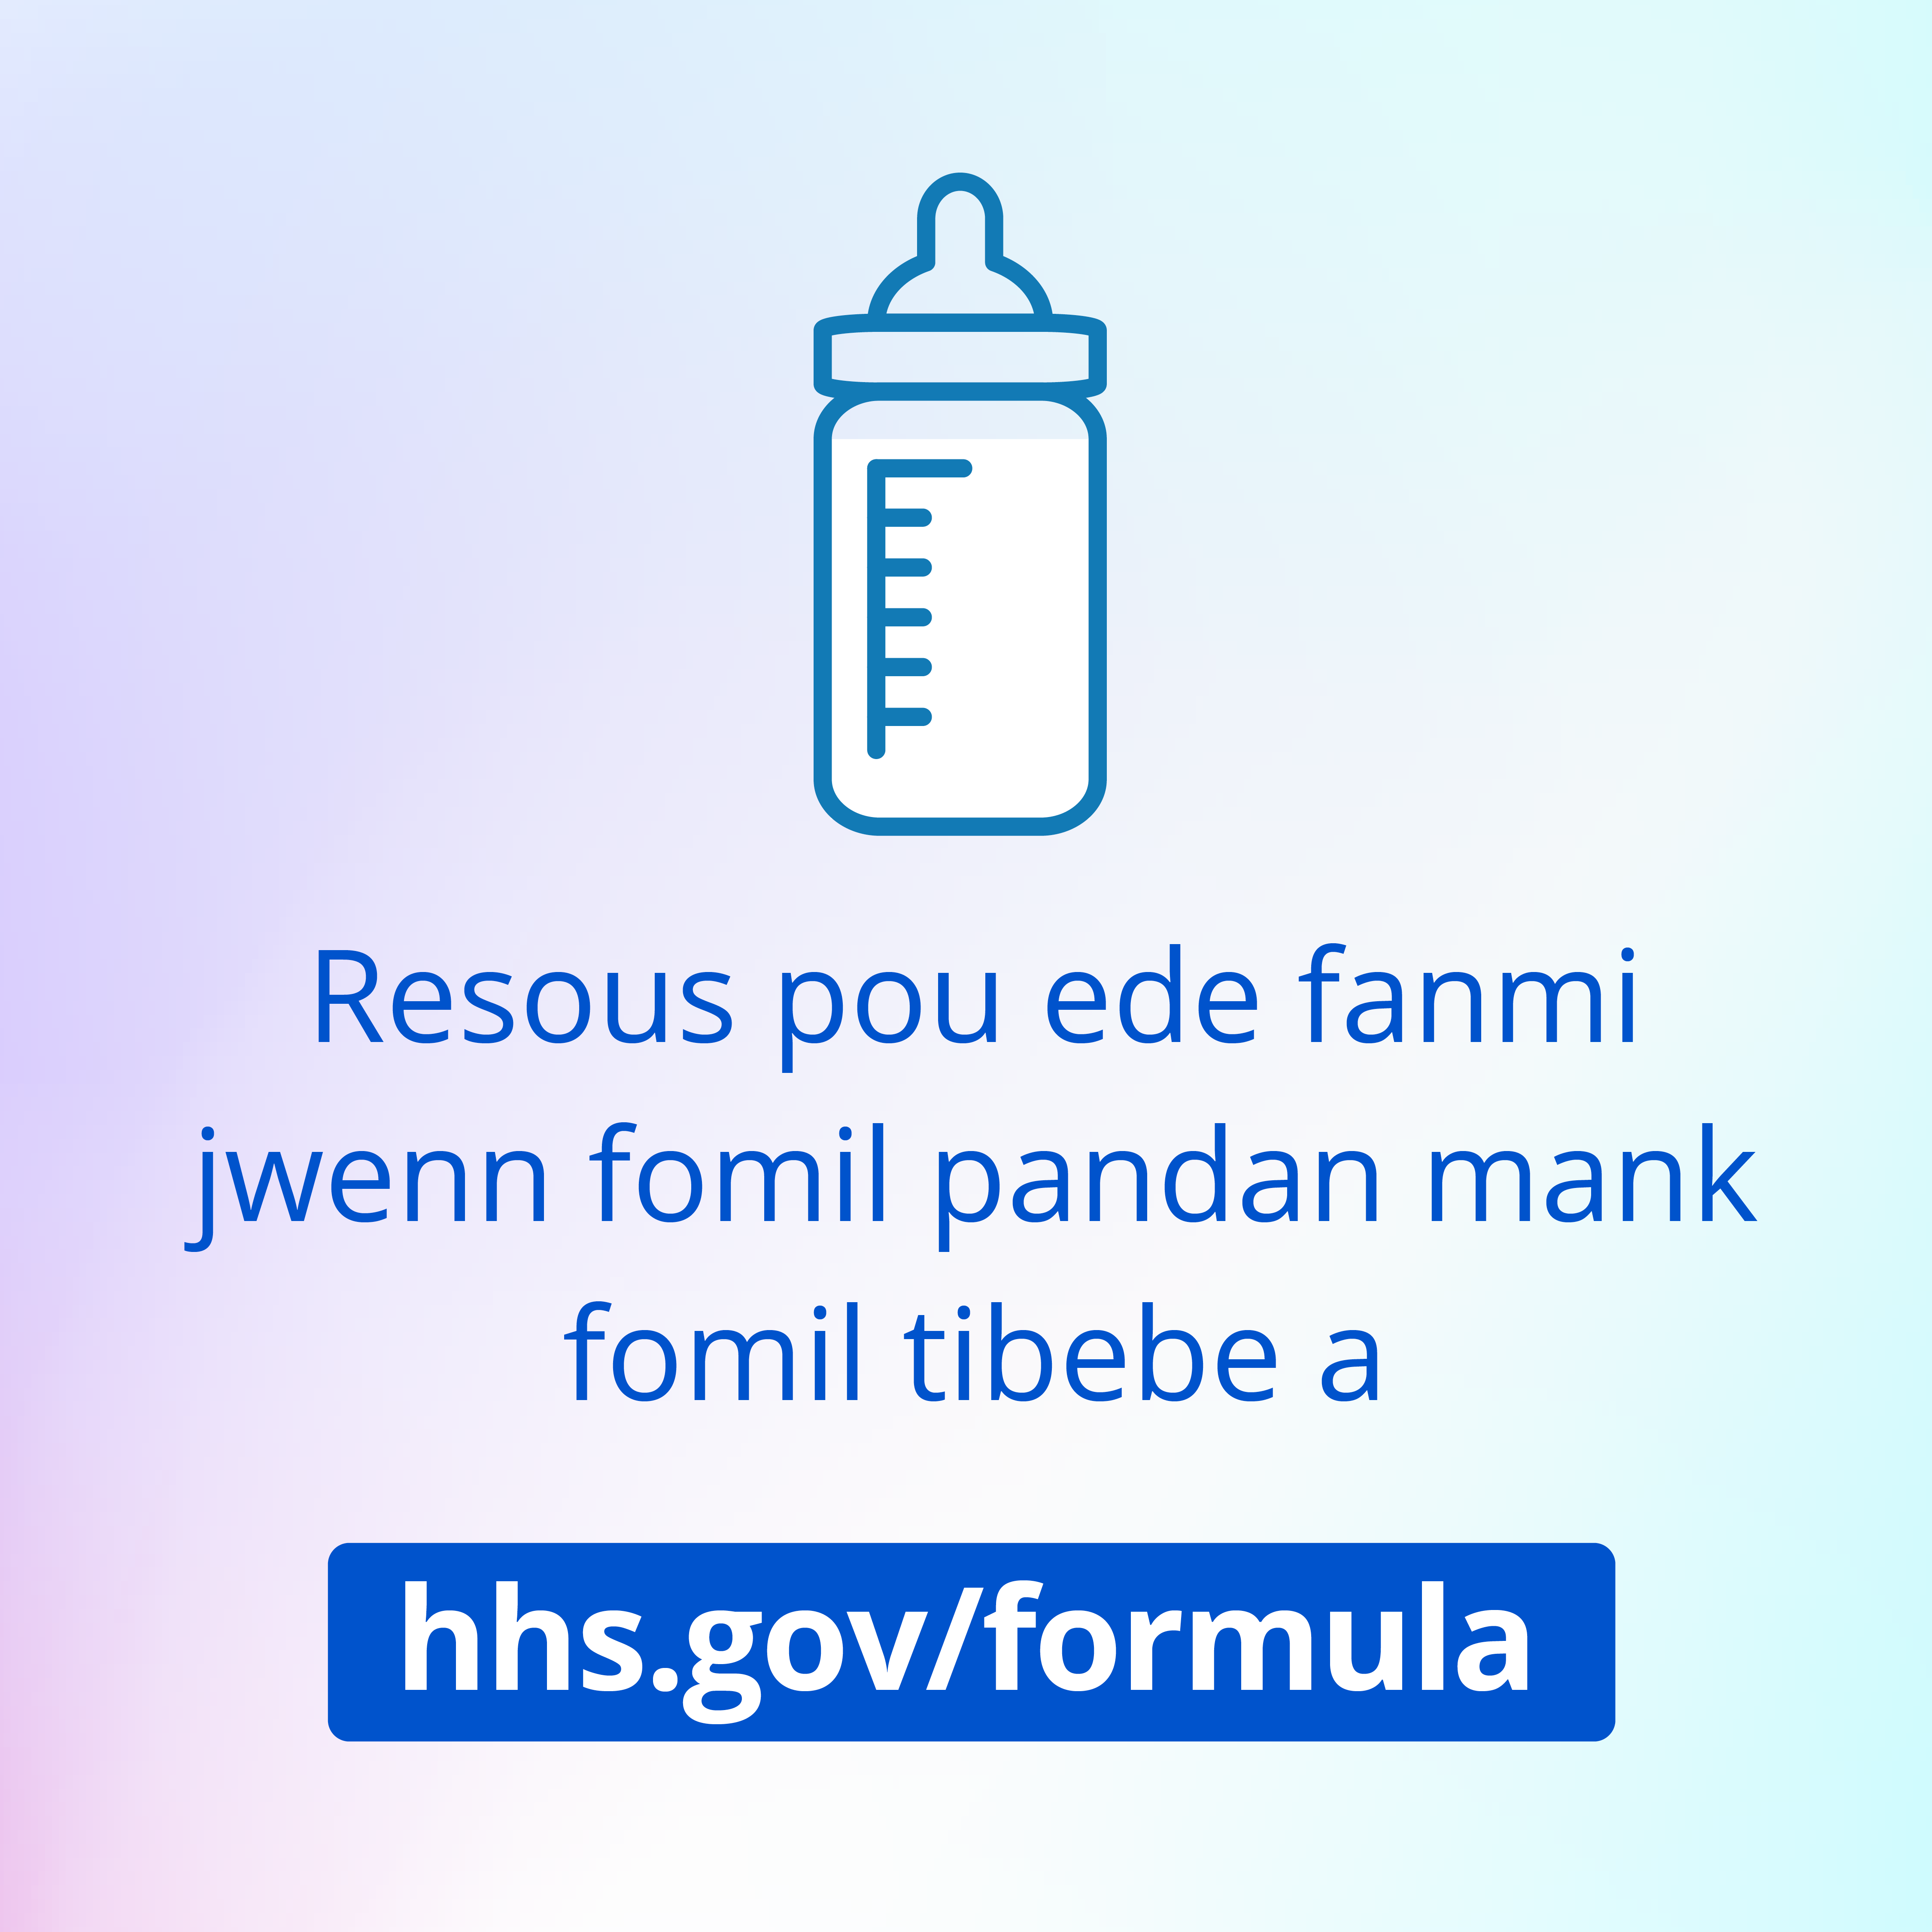 Instagram promo graphic to find resources for the infant formula shortage at hhs.gov/formula in Creole.